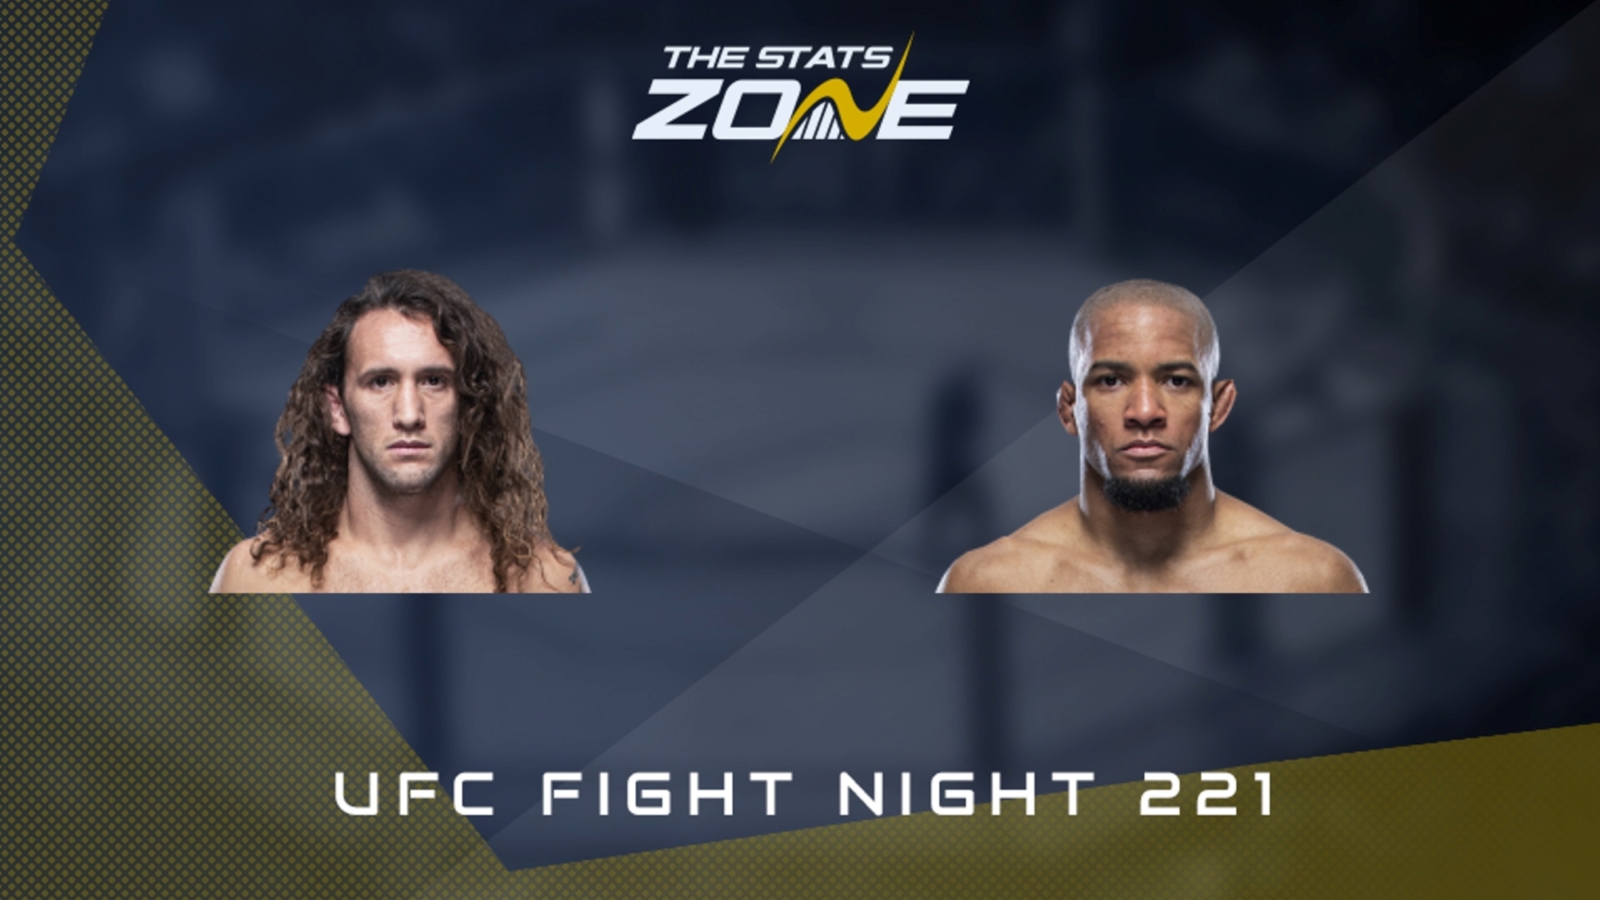 Victor Henry vs Tony Gravely start time, undercard, TV channel and streaming info for UFC Fight Night 221